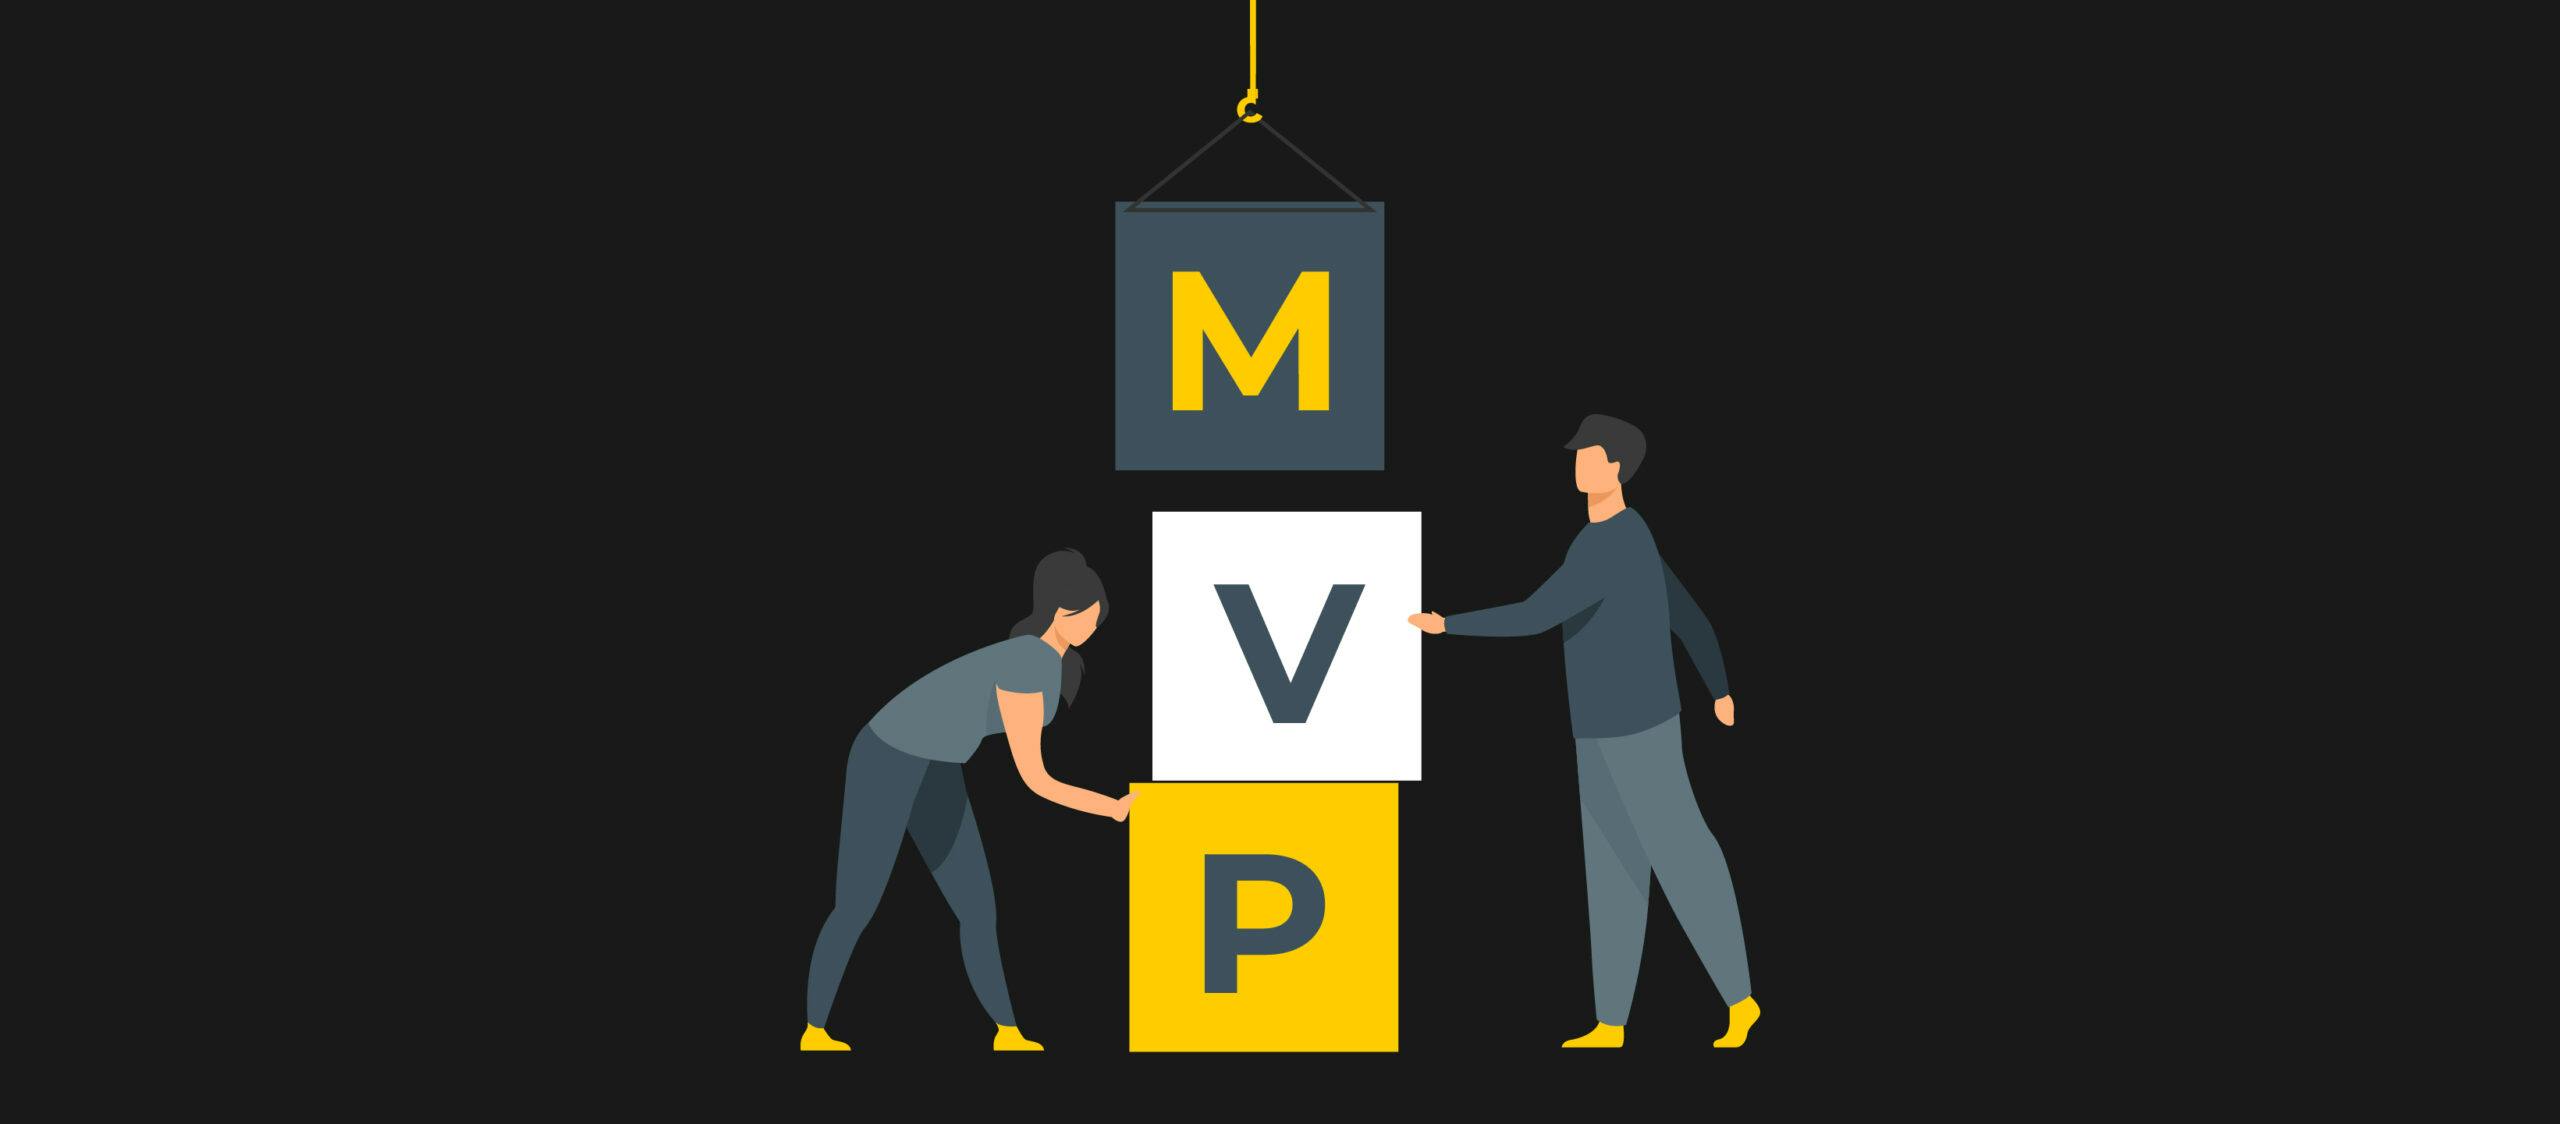 How to build an MVP?